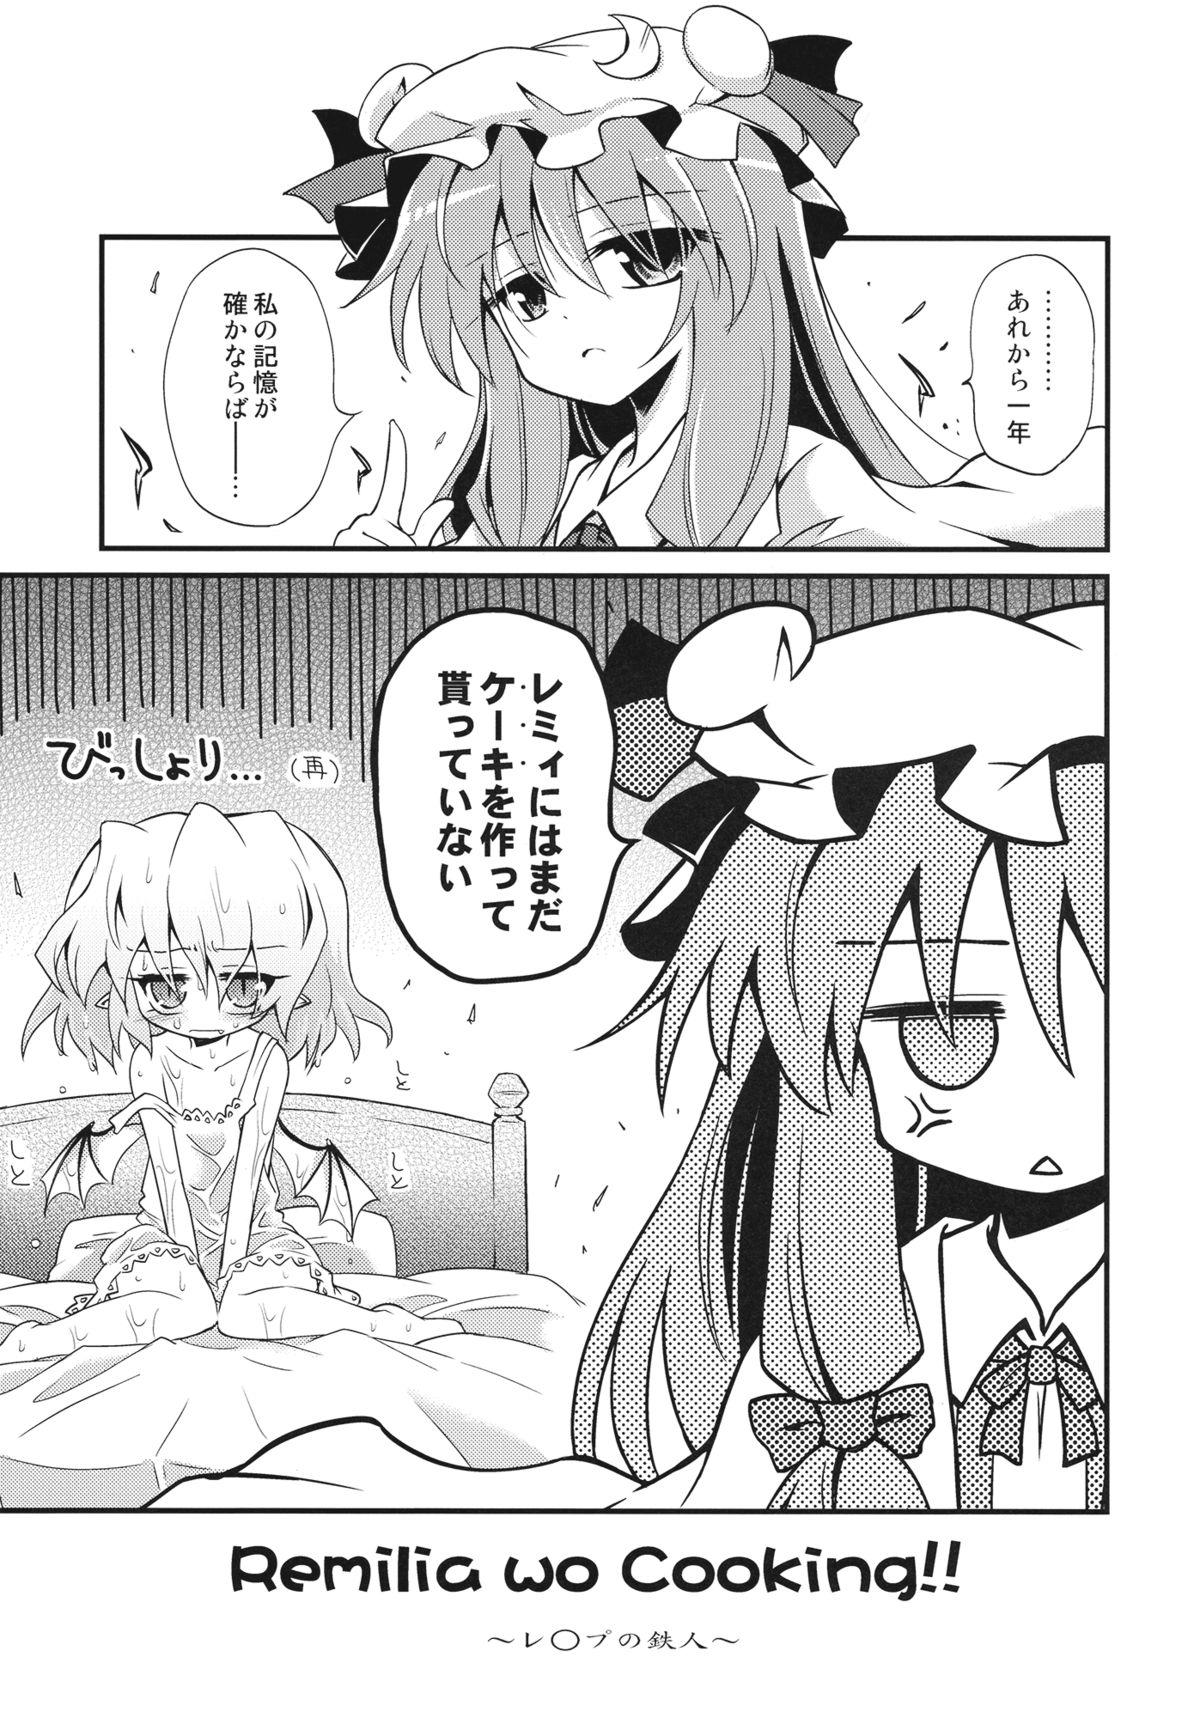 Remilia wo Cooking!! 2